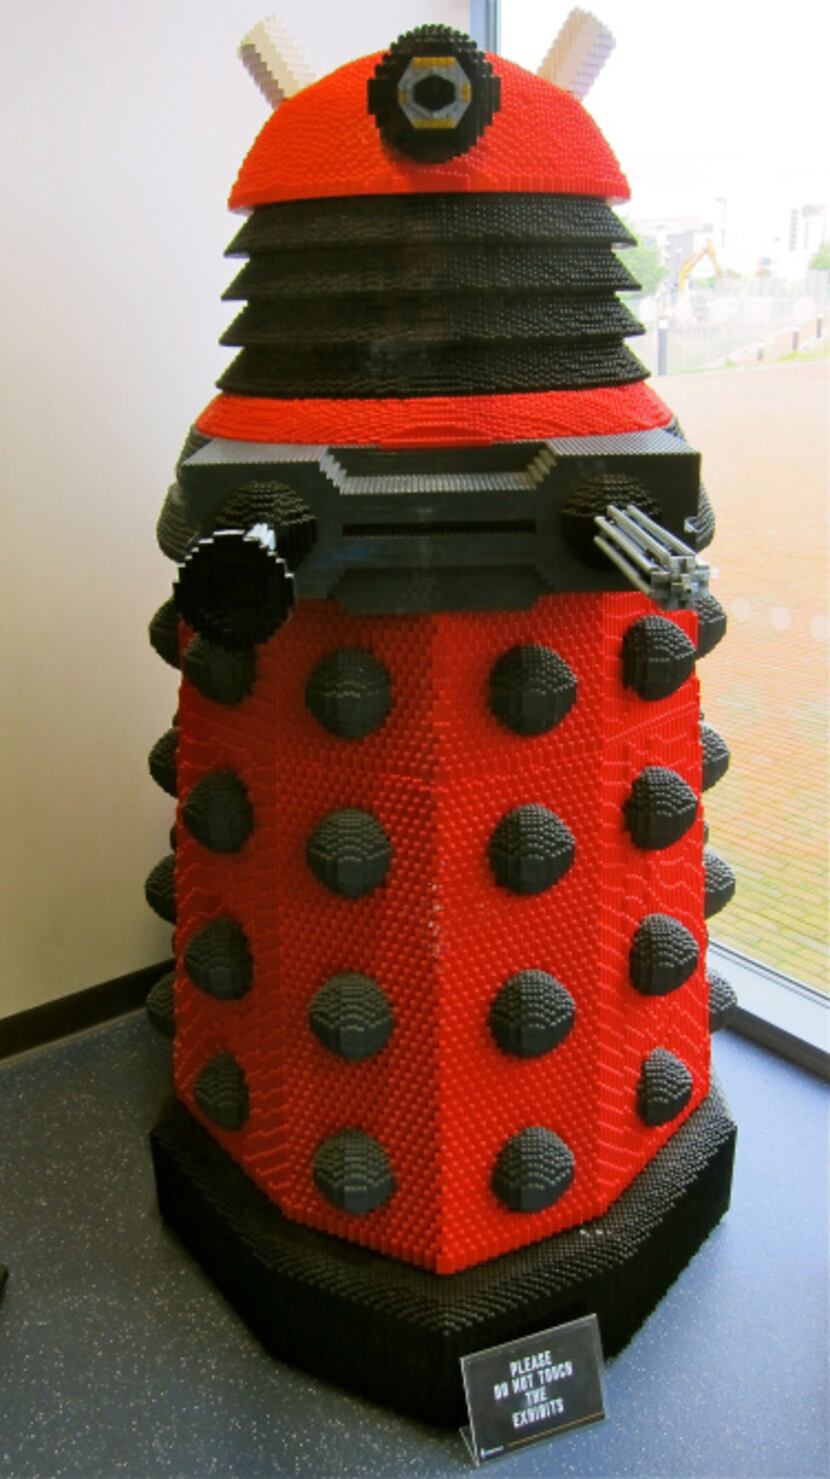 A Dalek built from Lego at the Doctor Who Experience in Cardiff, Wales.